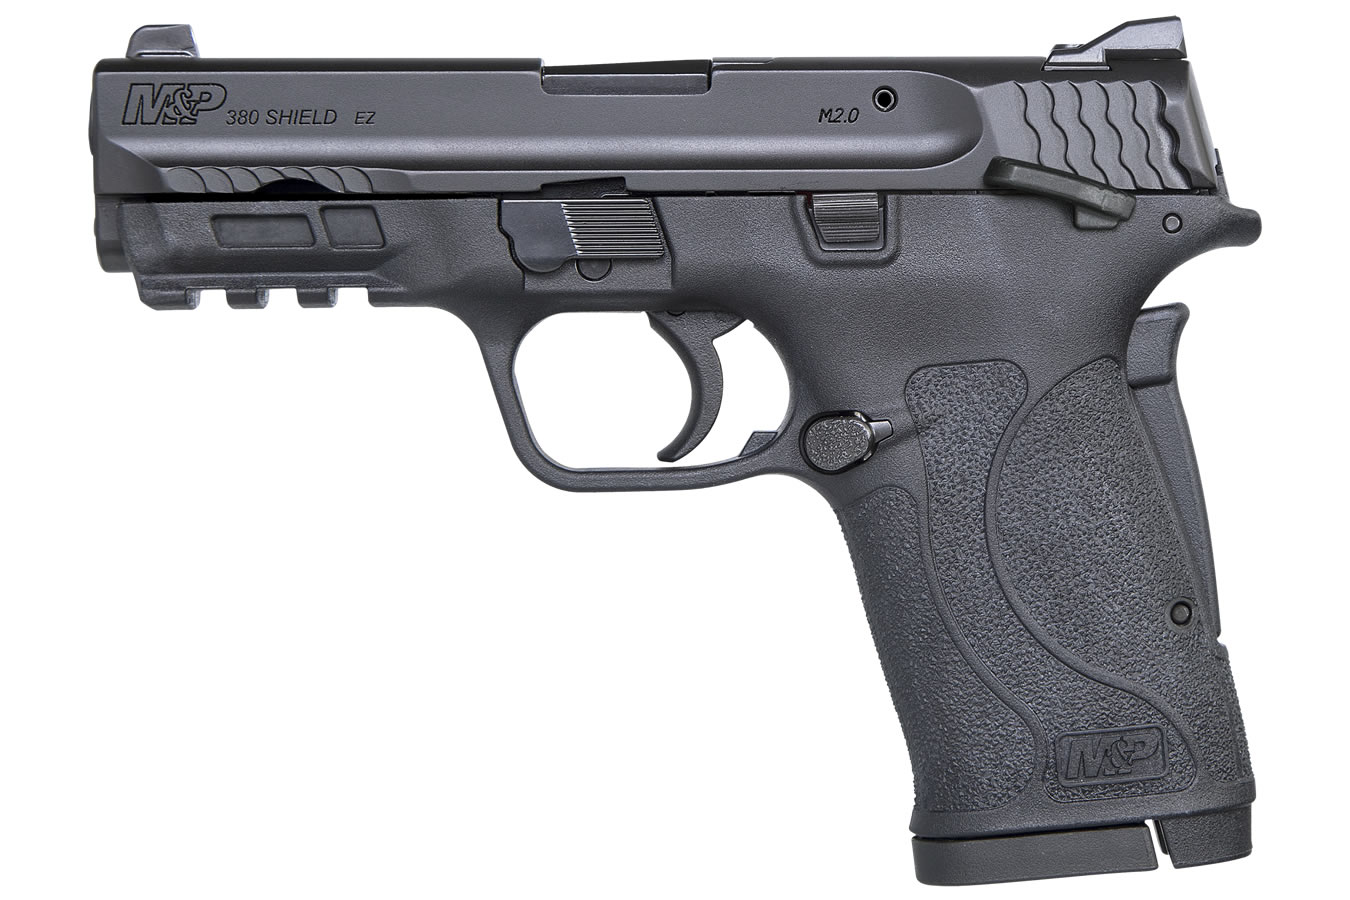 No. 7 Best Selling: SMITH AND WESSON MP380 SHIELD 380 ACP PISTOL W/ THUMB SAFETY